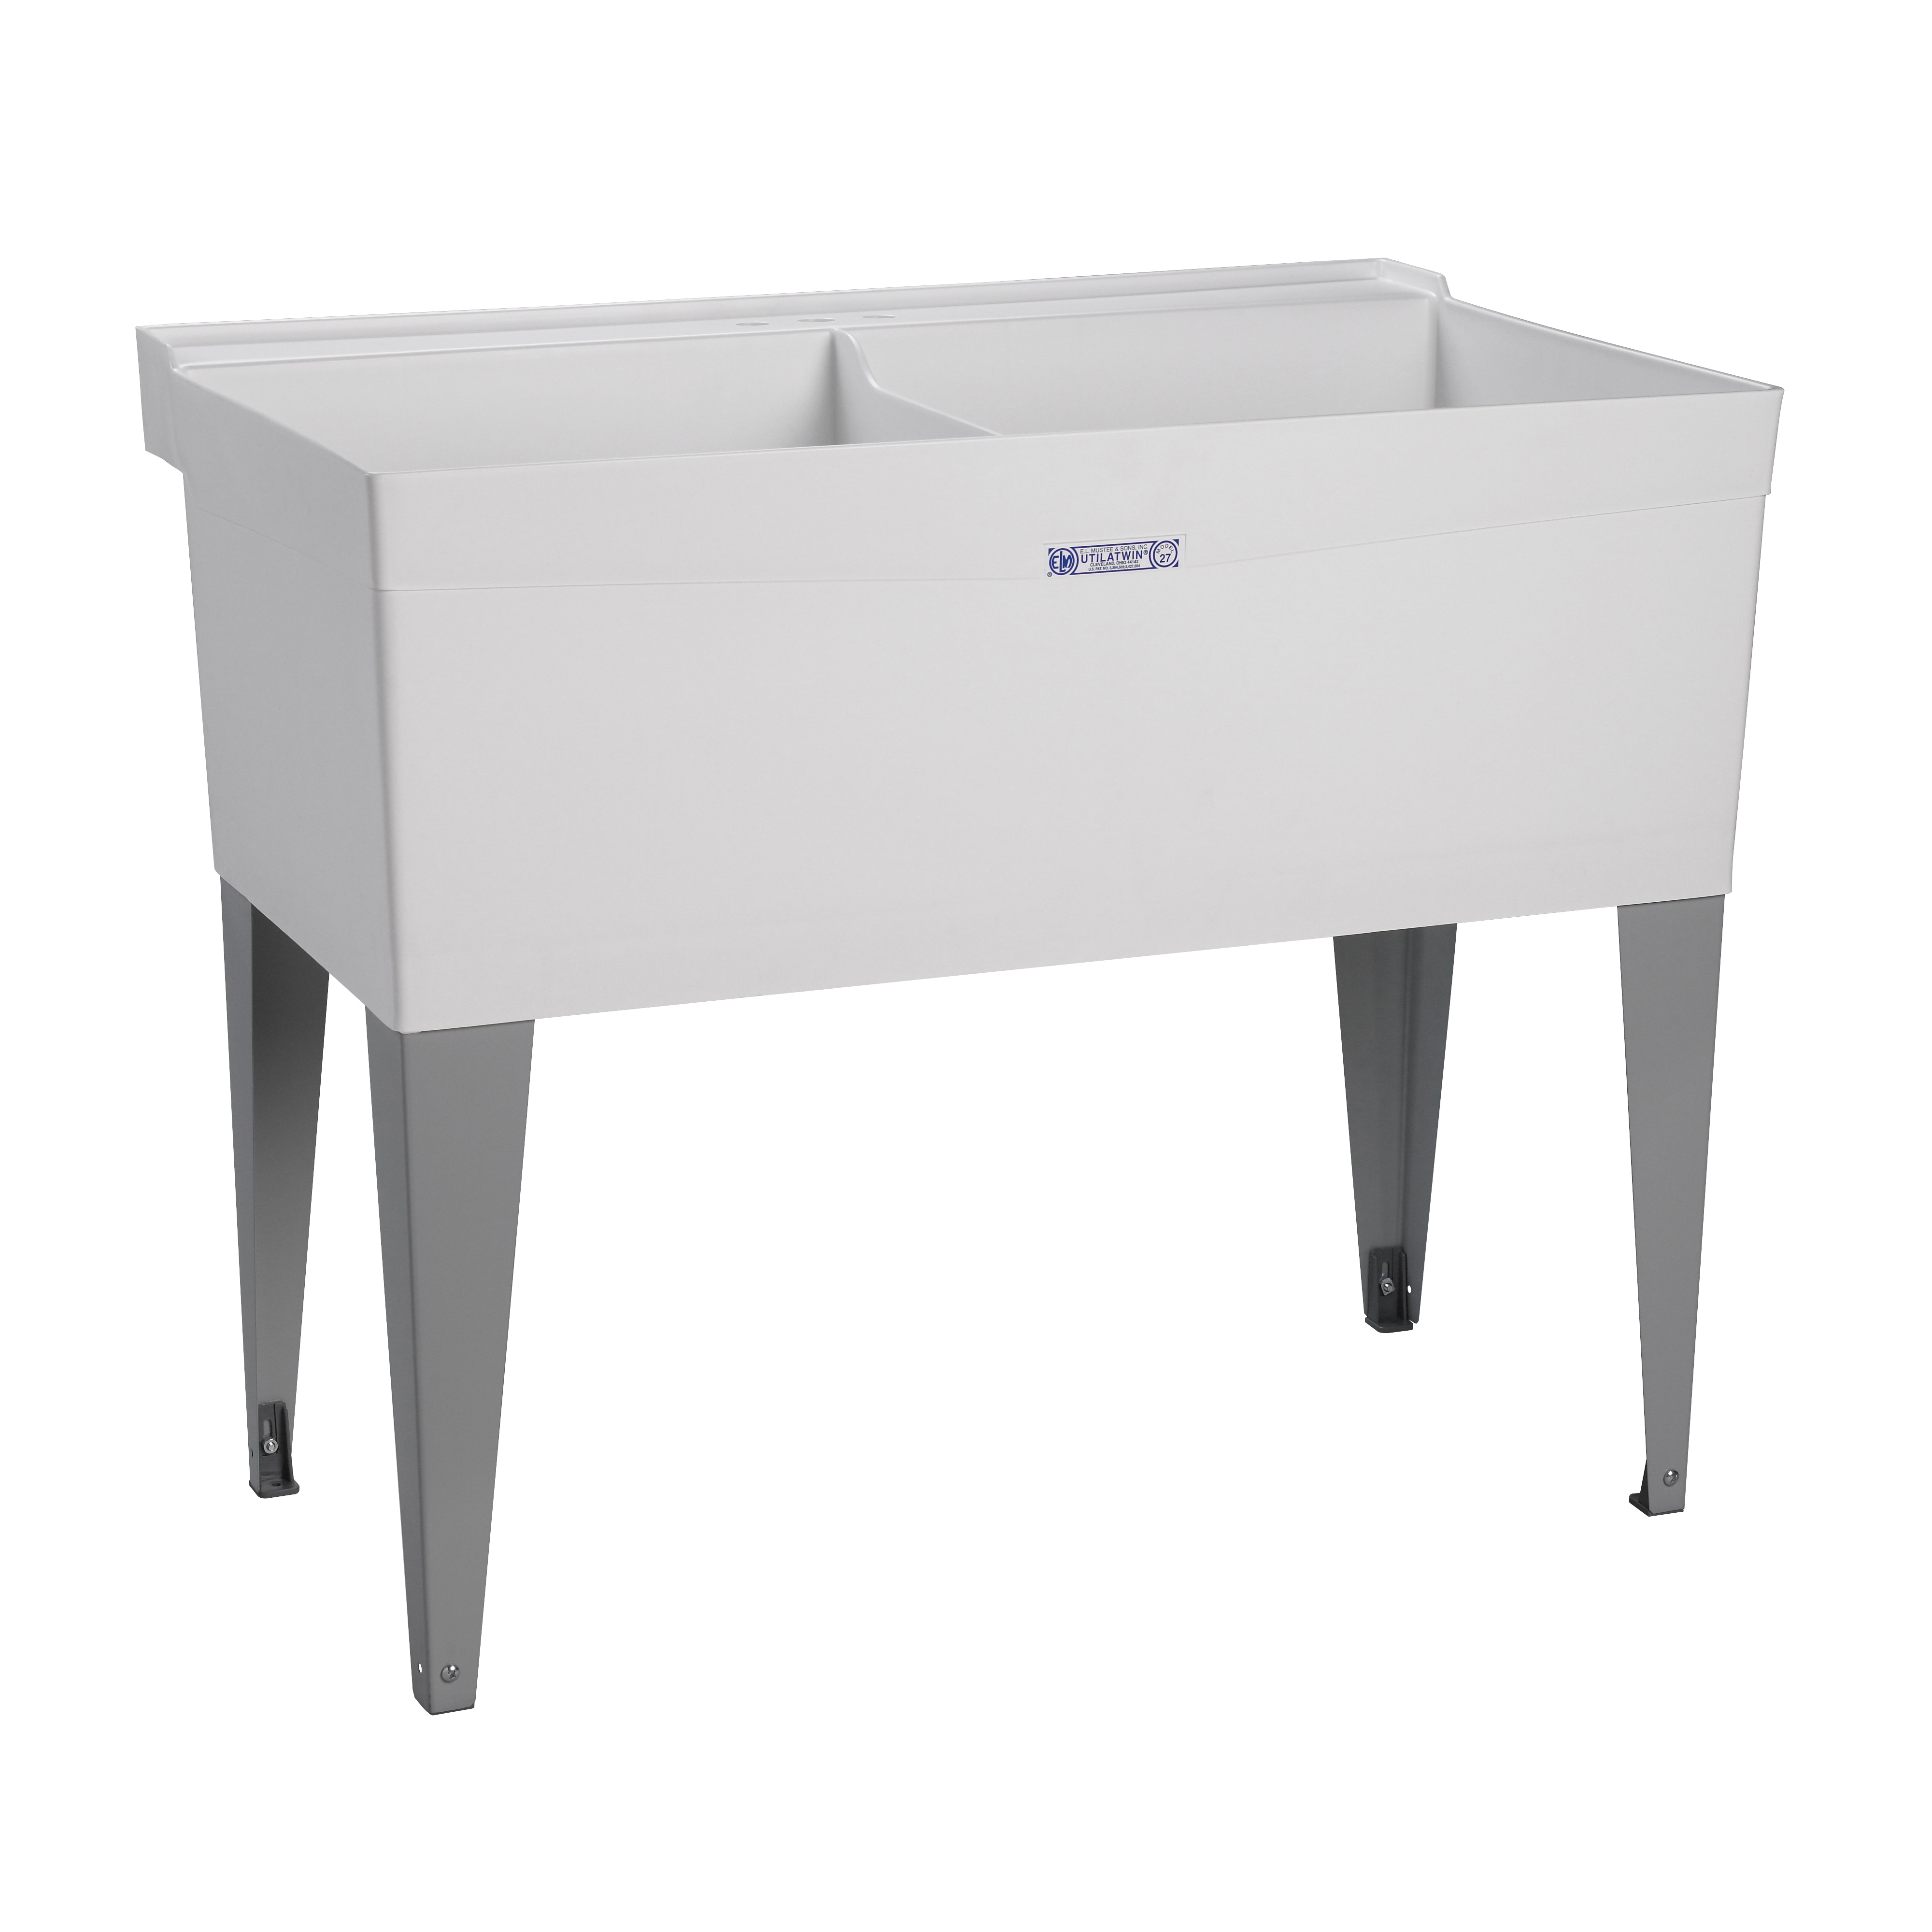 UTILATUB Series 27F Laundry Tub, 38 gal Capacity, 2-Deck Hole, 40 in OAW, 34 in OAD, 24 in OAH, Thermoplastic